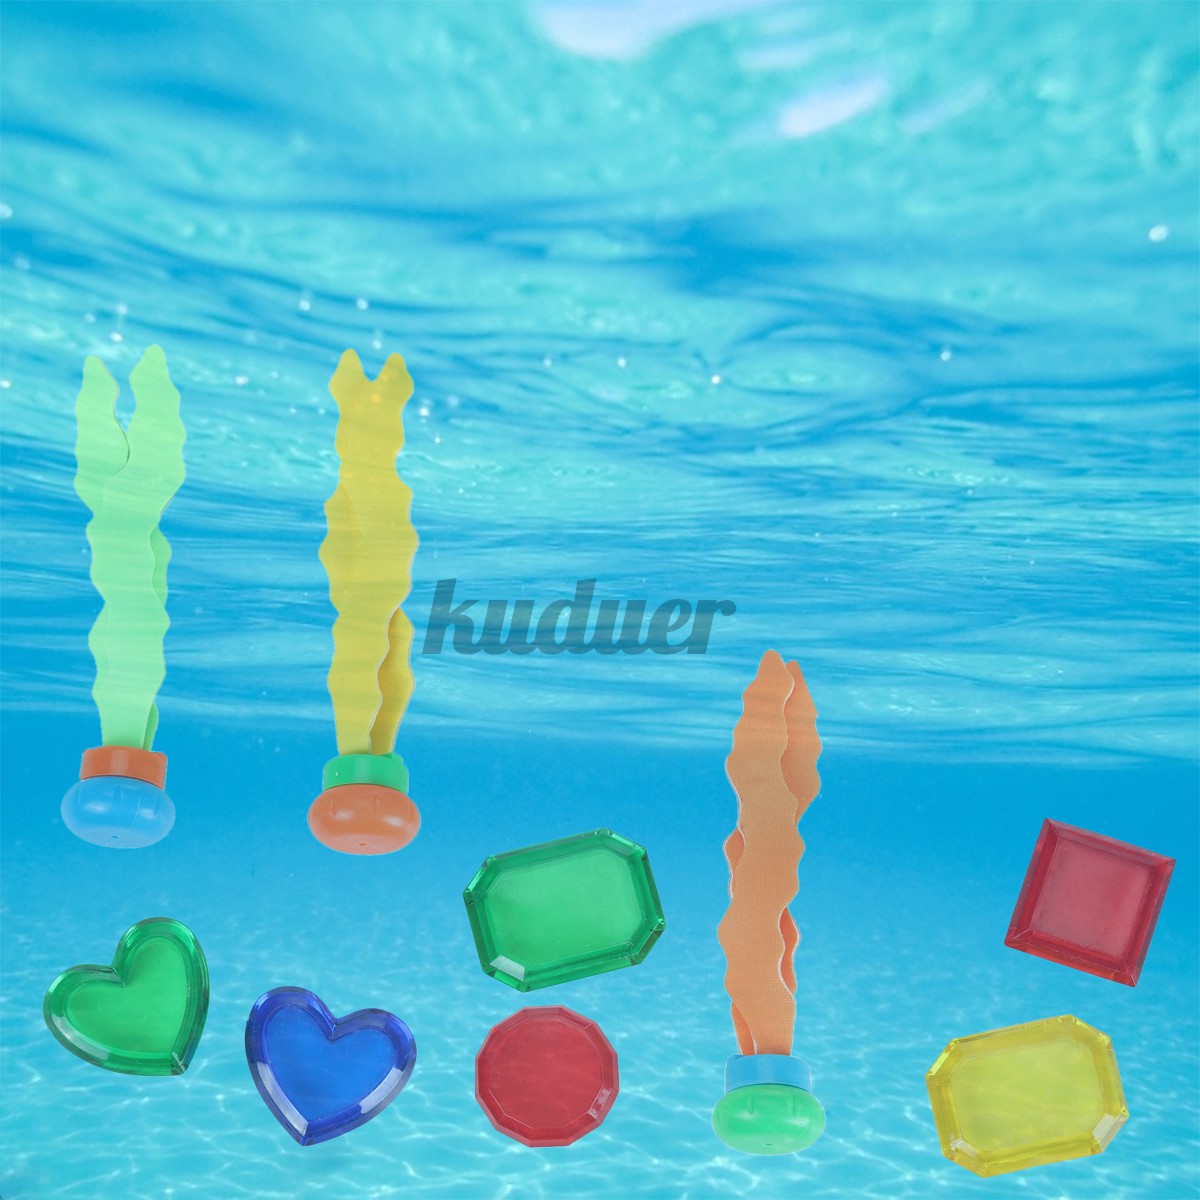 34 PCS/Set Child Summer Underwater Swimming/Diving Pool Toys, Diving Rings, Torpedo With Underwater Treasures Gift Set